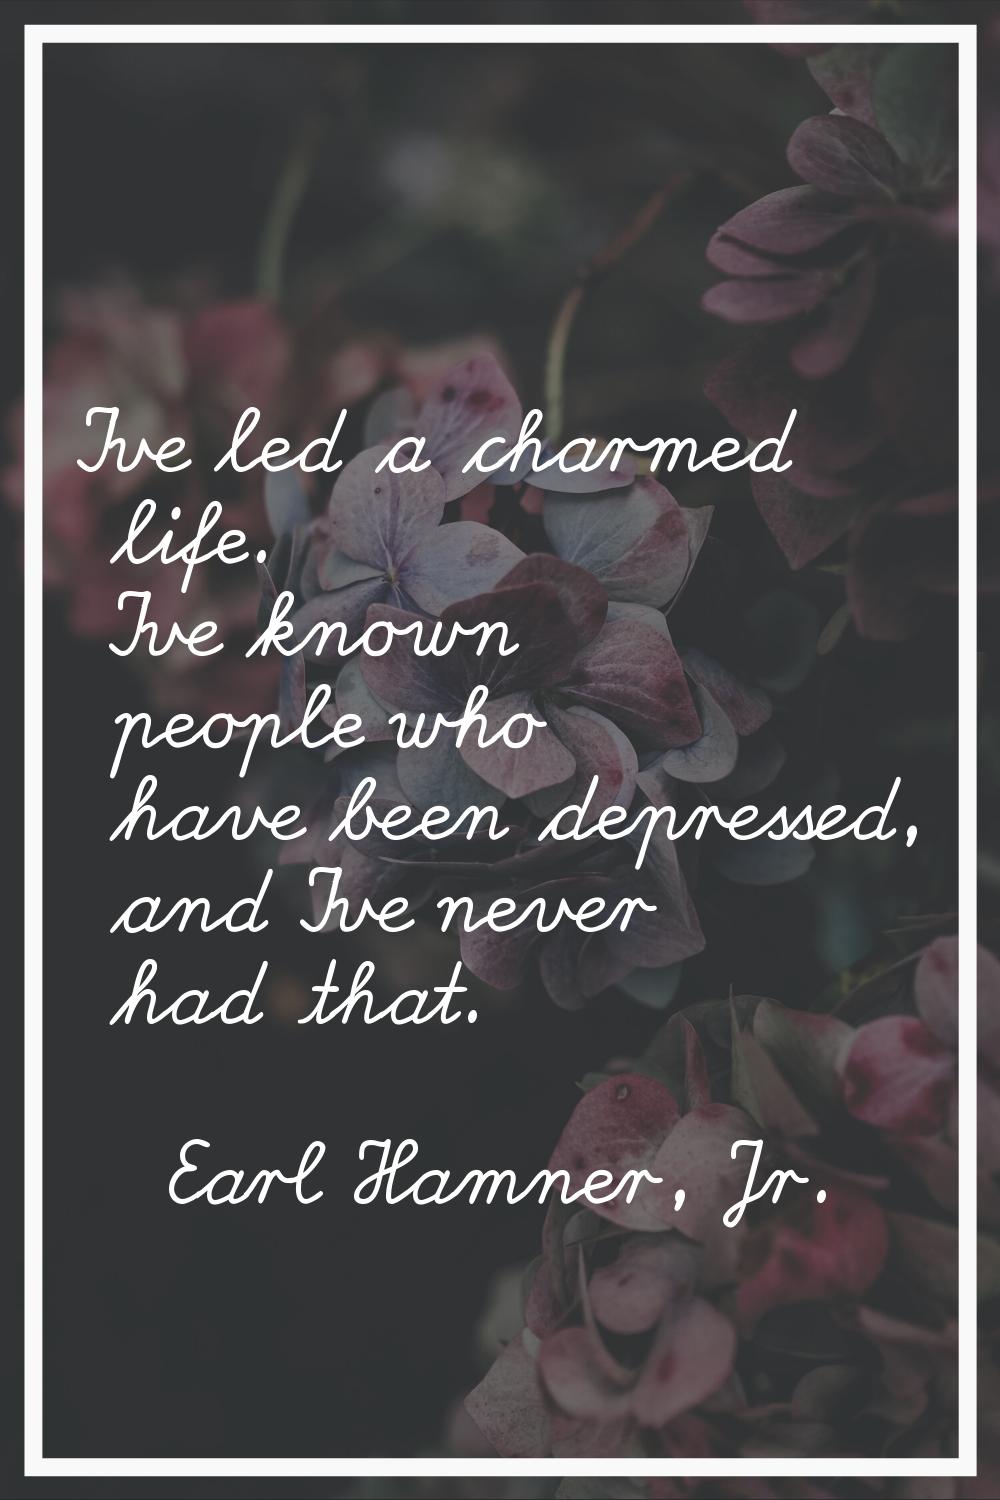 I've led a charmed life. I've known people who have been depressed, and I've never had that.